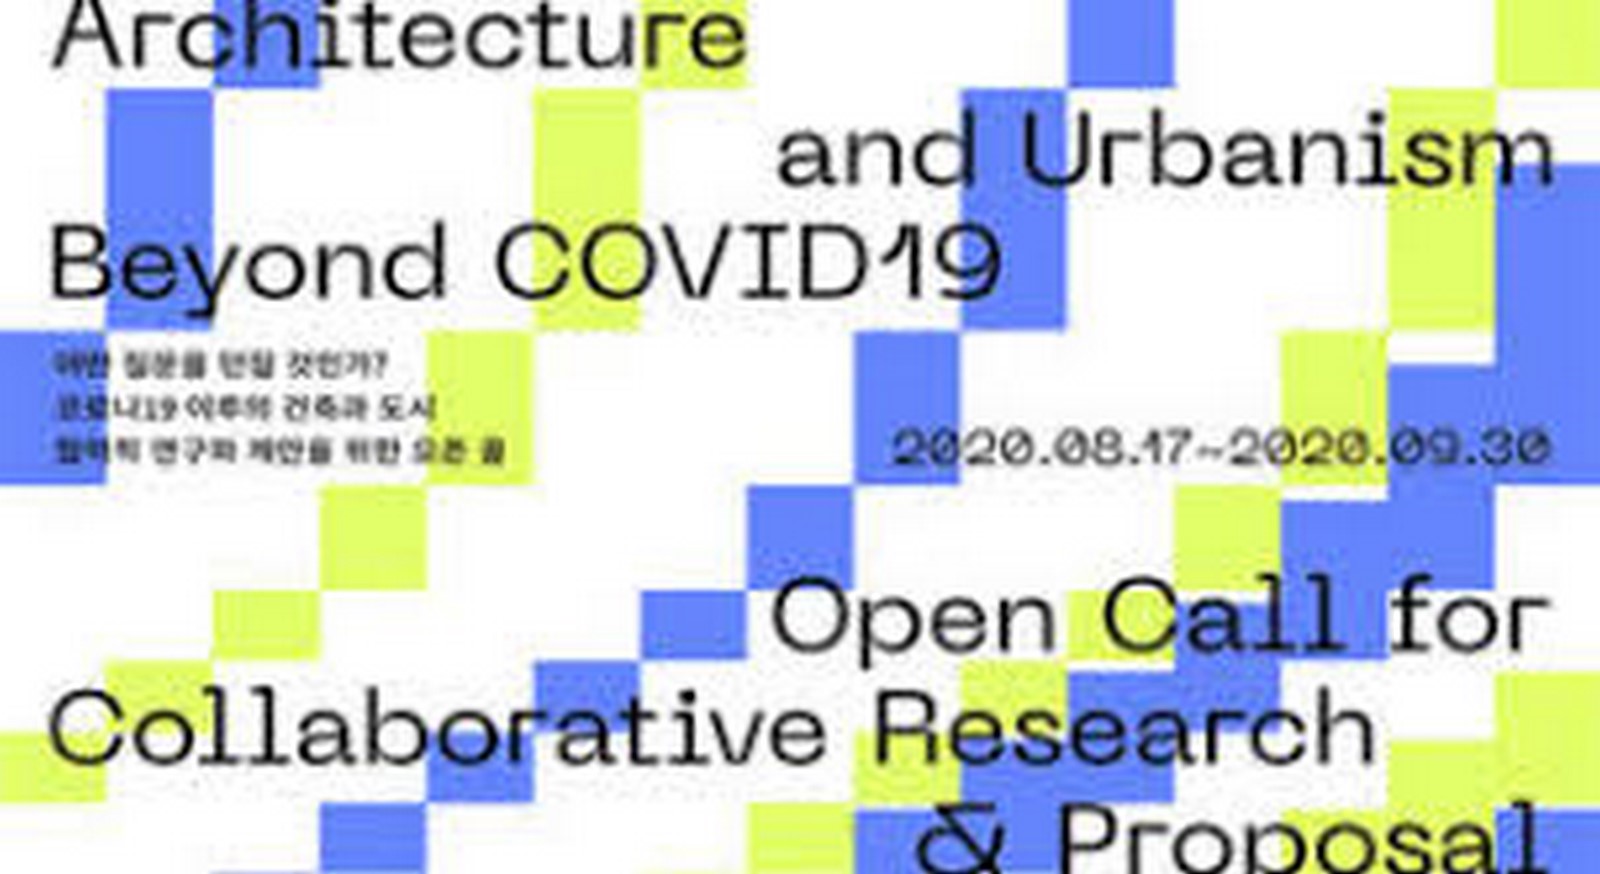 8 Competitions for pandemic responsive architecture architects can participate in - Sheet5